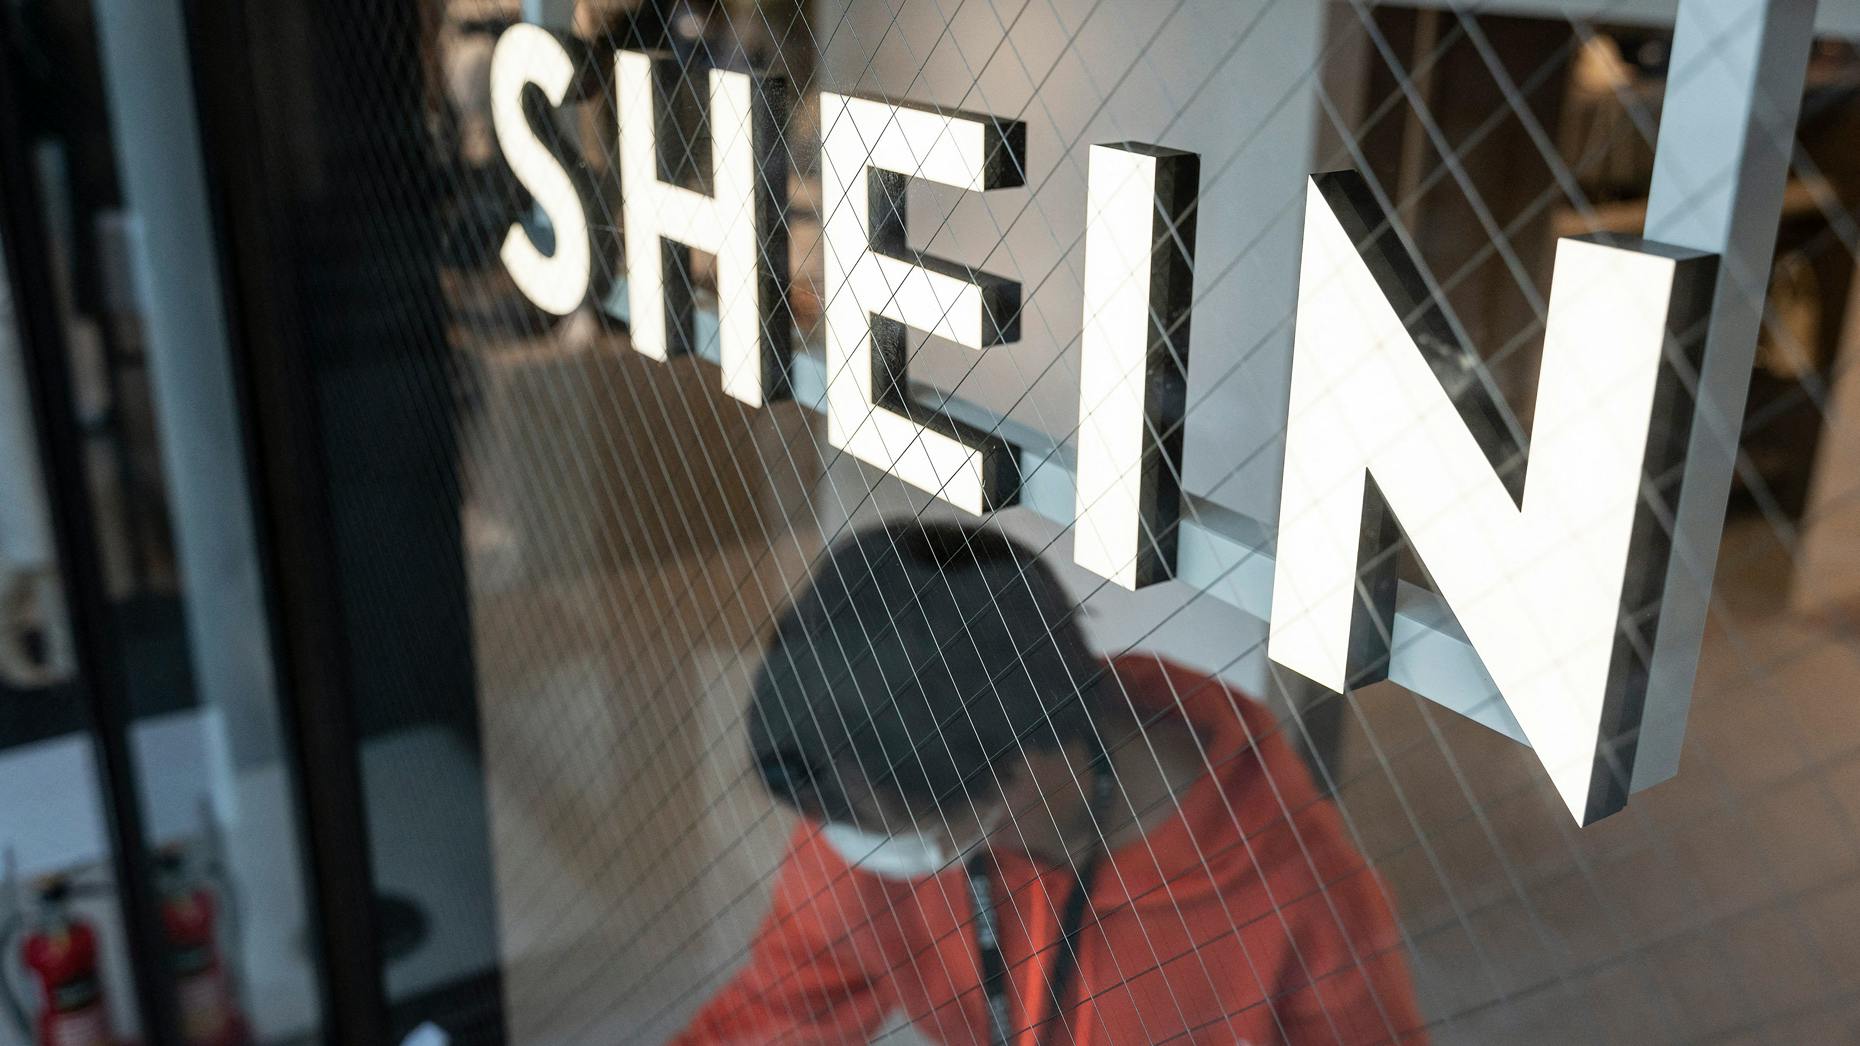 Shein Is Getting More Popular With Teens